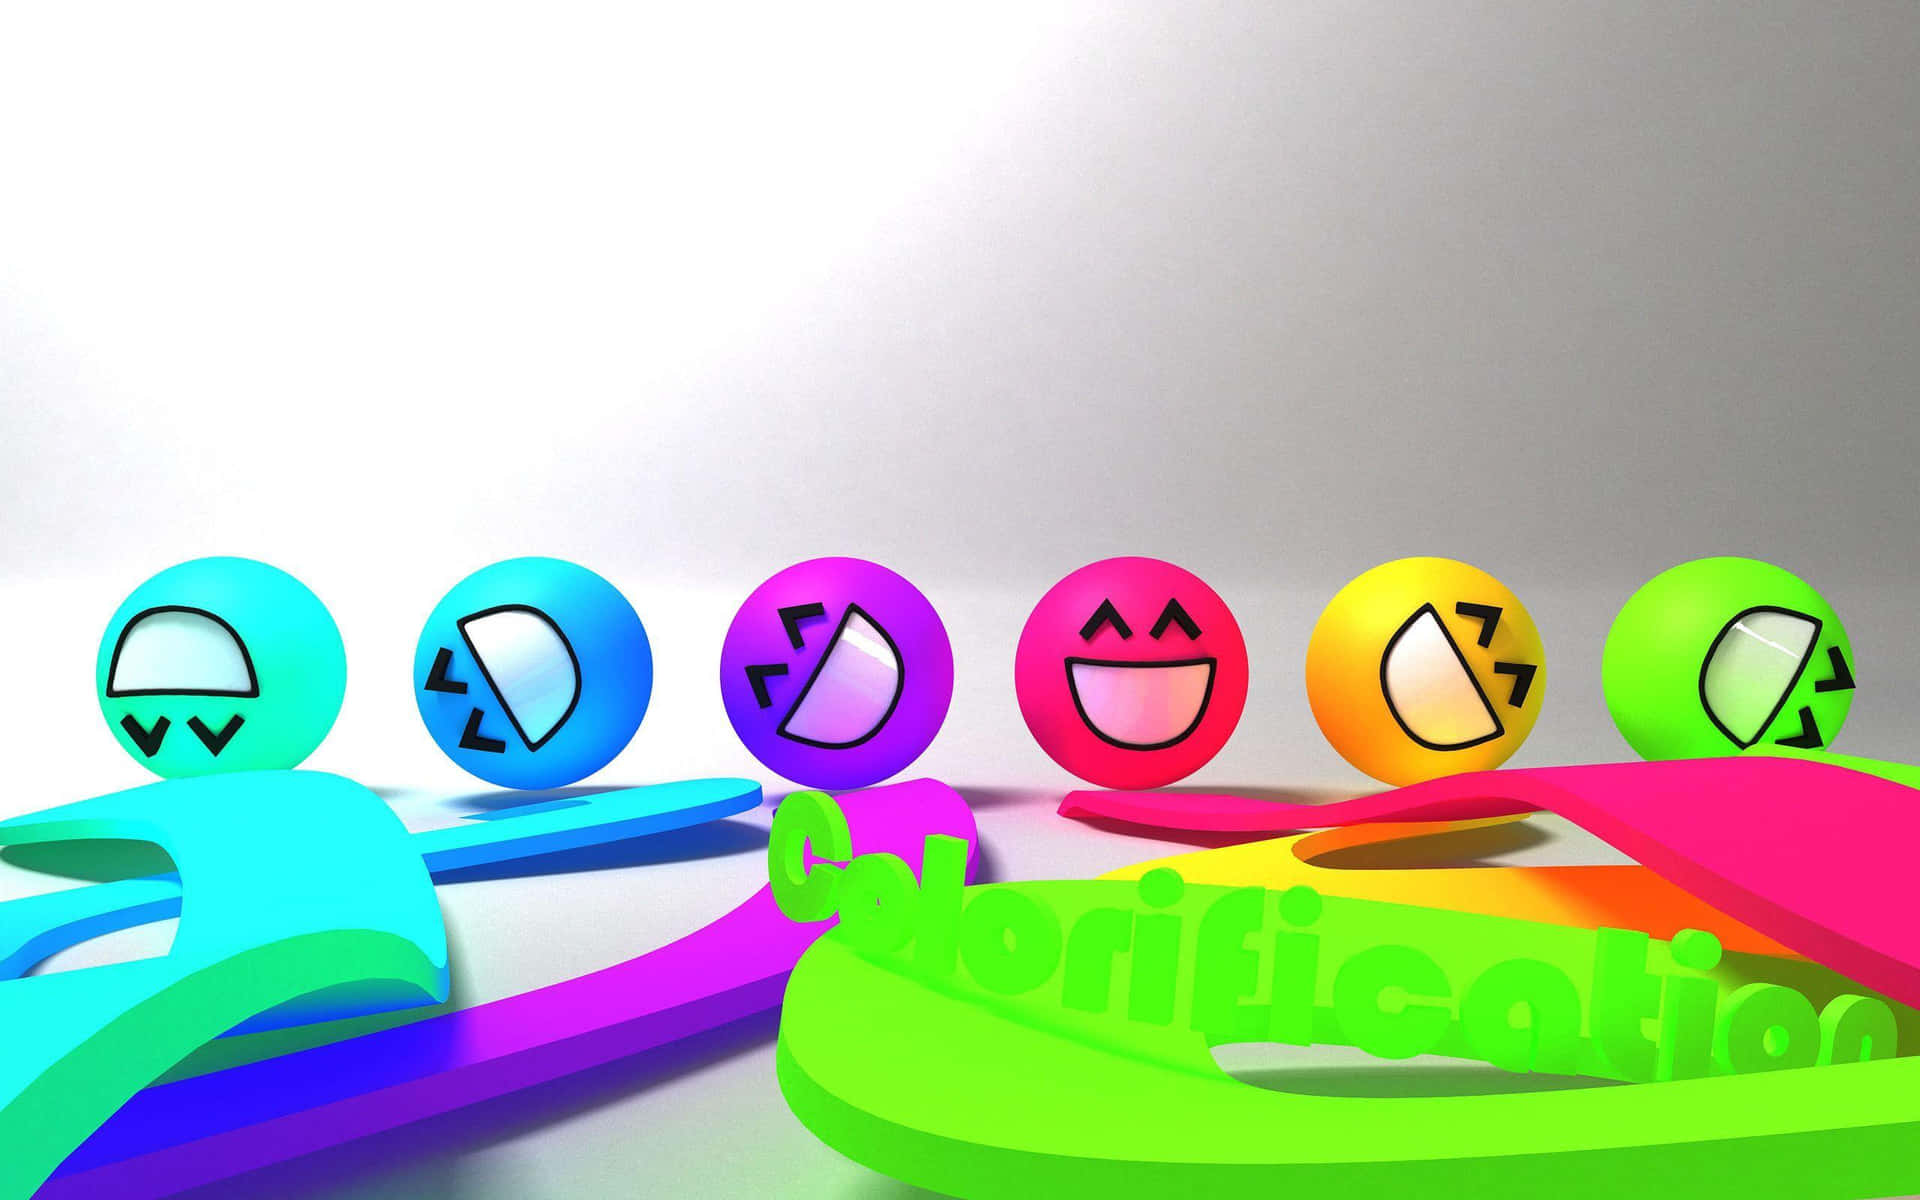 Digital Art Of Cool Colored Smiley Face Wallpaper